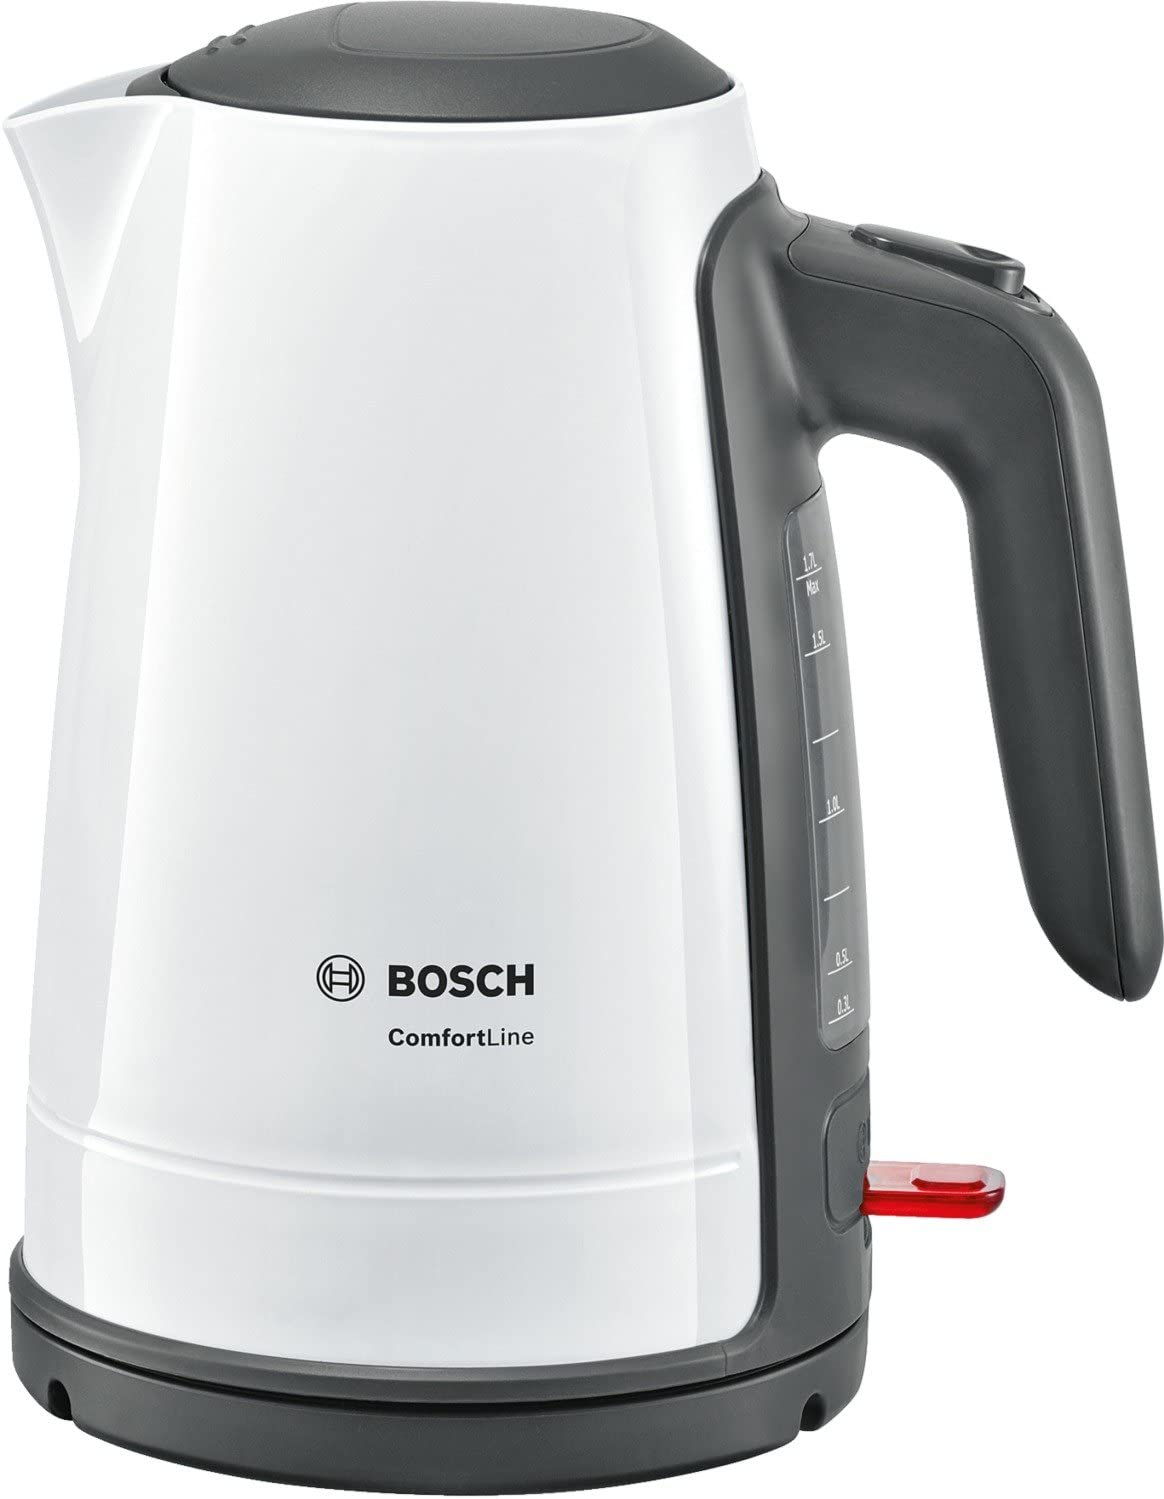 Bosch ComfortLine TWK6A011 Wireless Kettle, 1-Cup Function, Large Opening, Overheating Protection, Removable Limescale Filter, 1.7 L, 2400 W, White